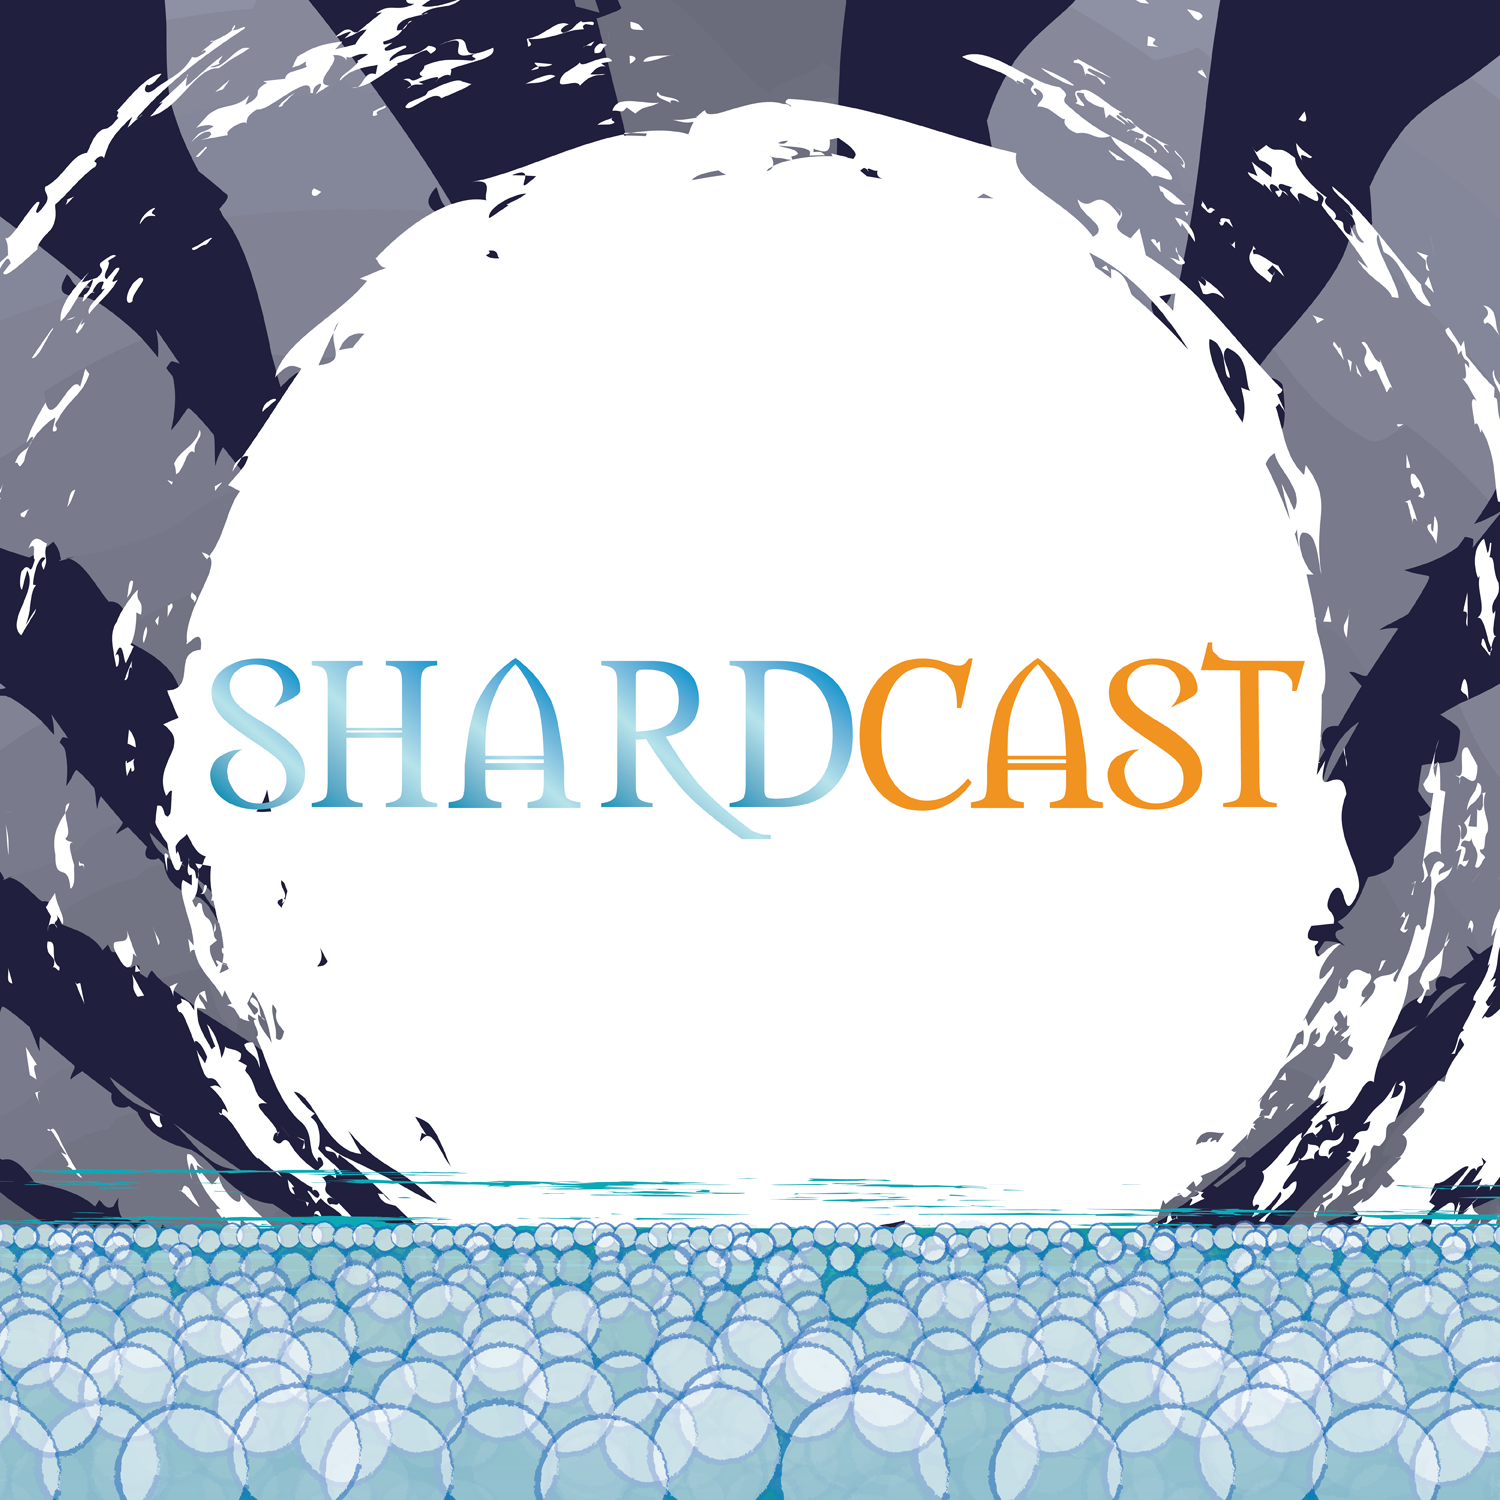 More information about "Shardcast: The Returned"